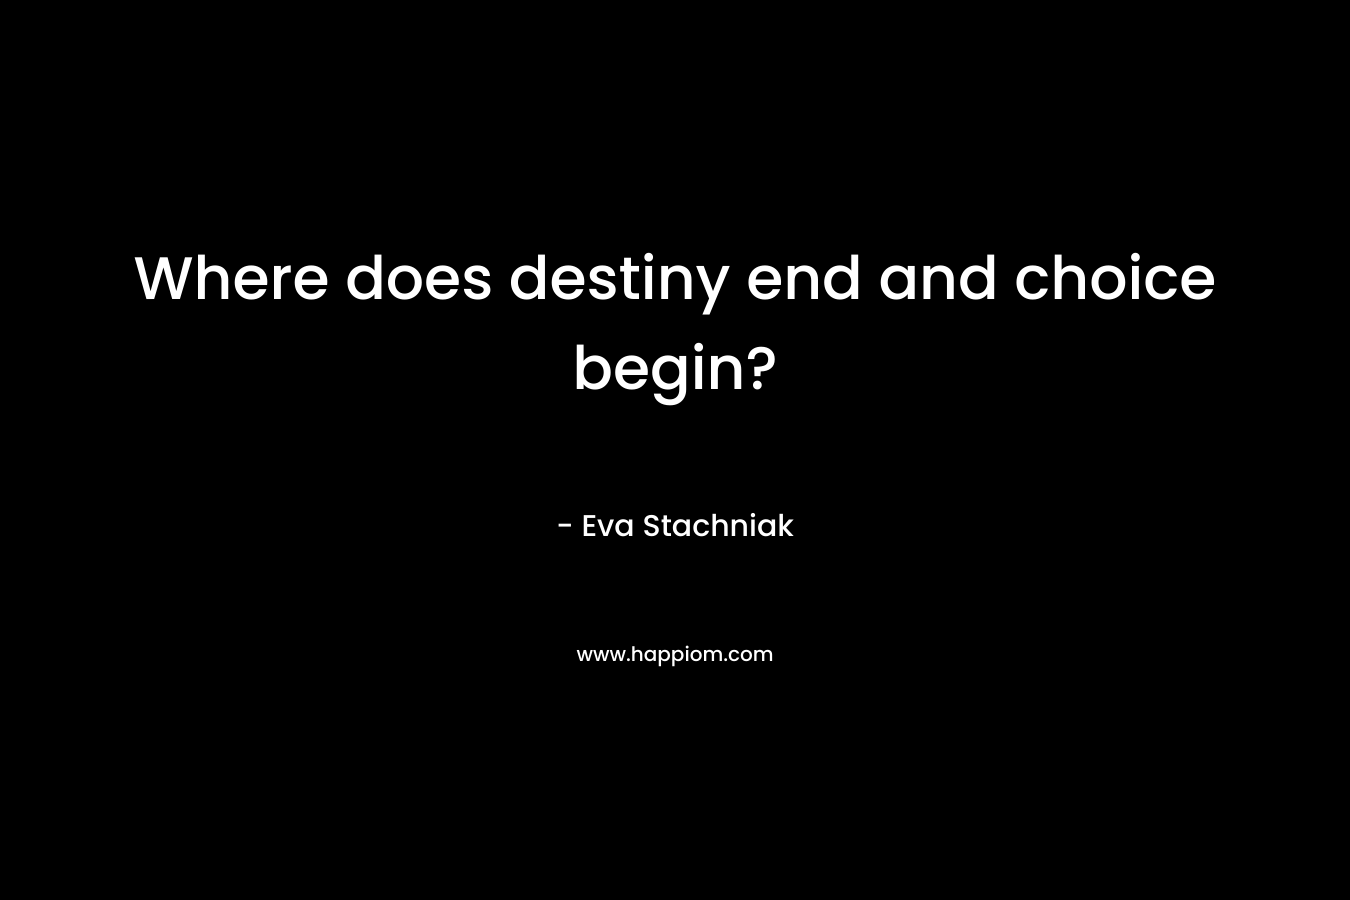 Where does destiny end and choice begin?